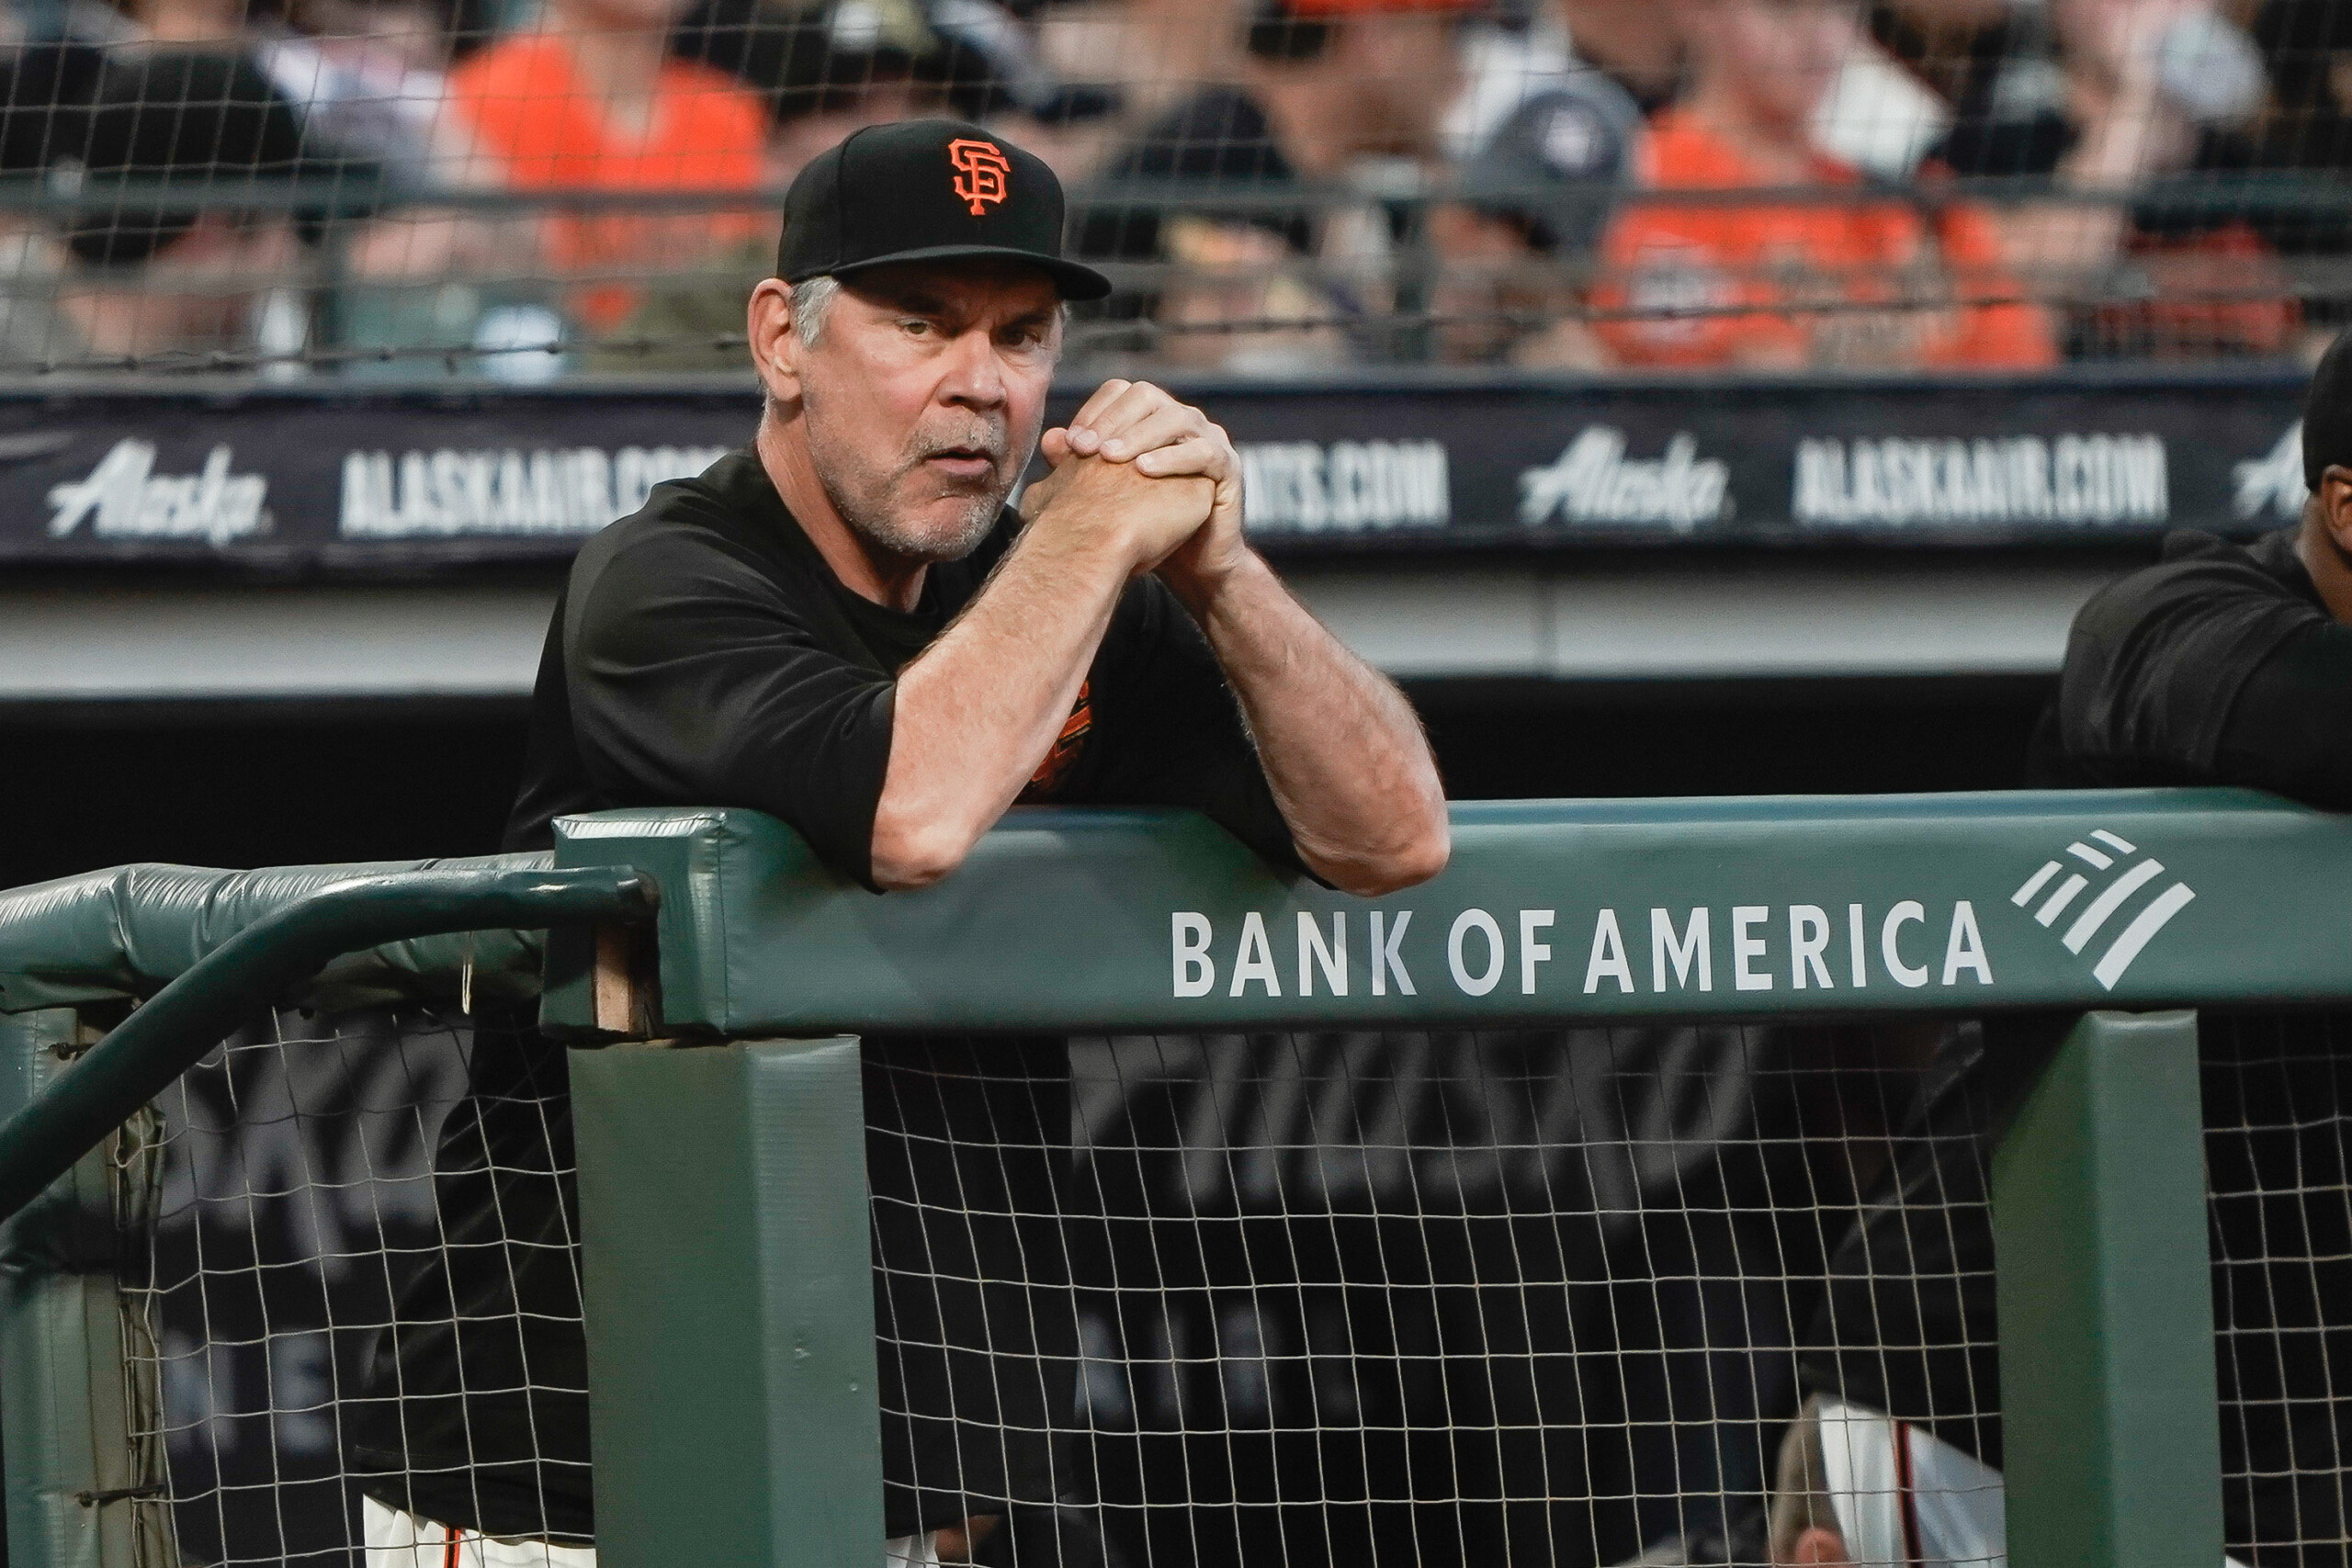 Chris Young, Bruce Bochy and a momentous mound visit: 'You're the